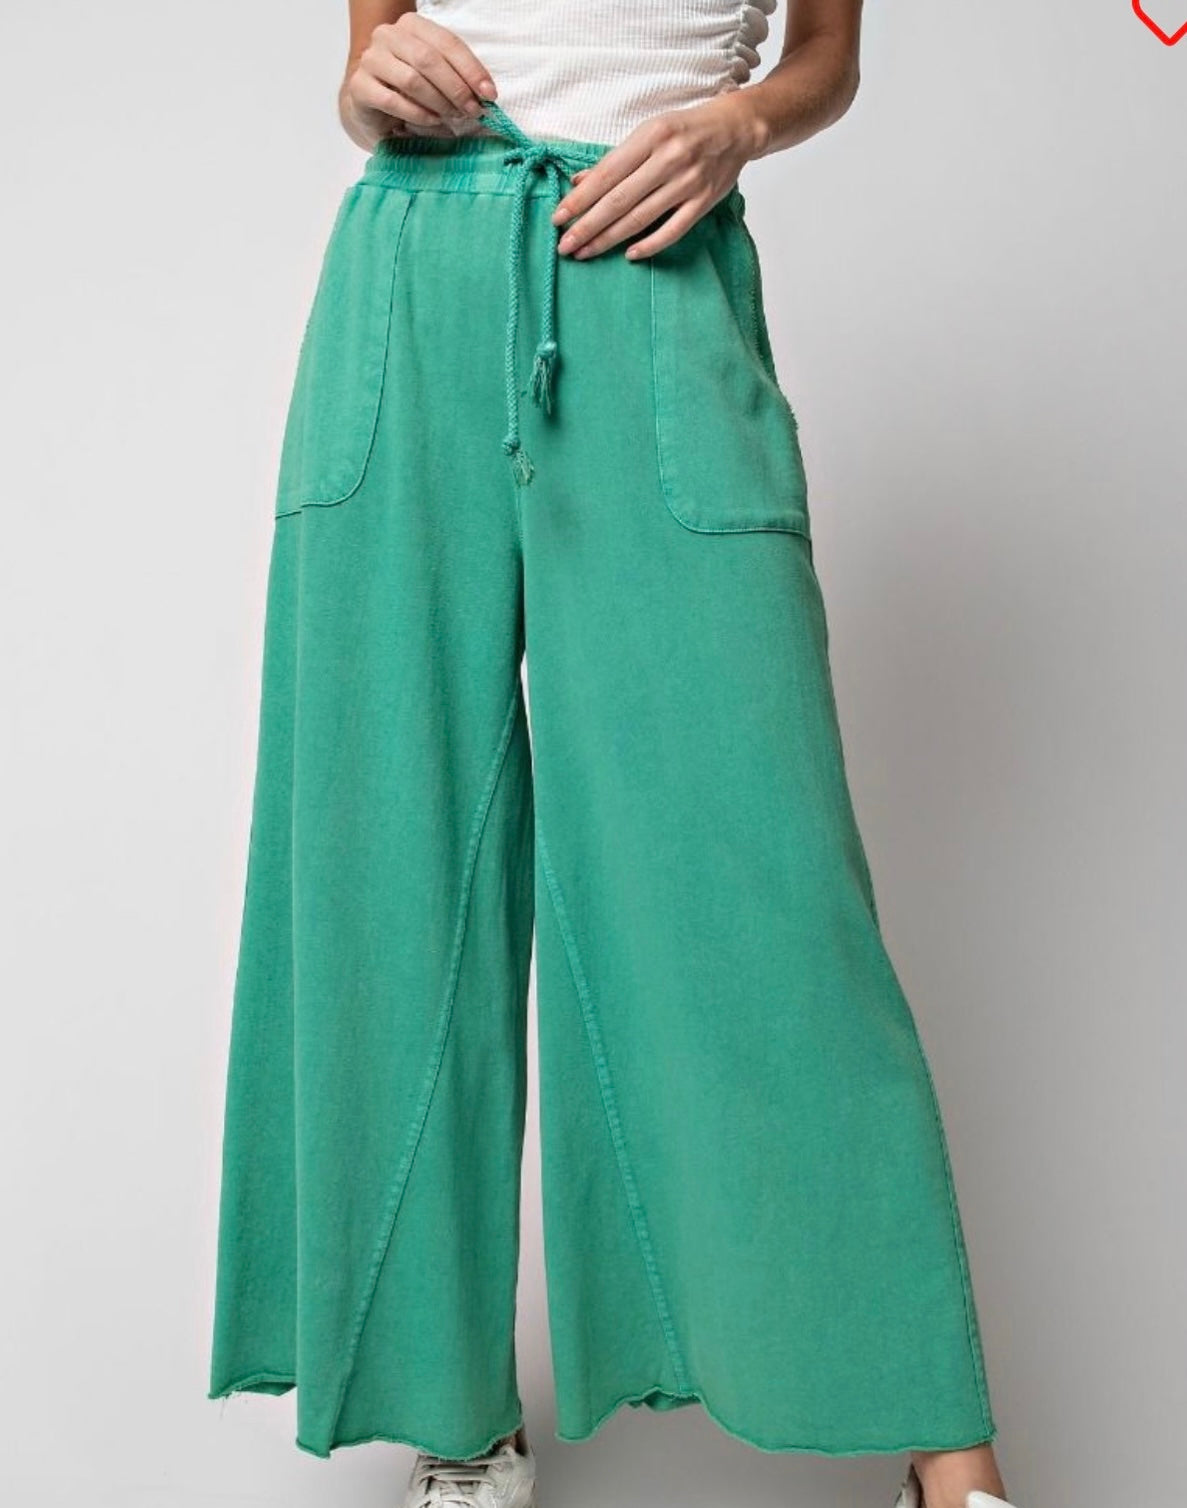 Easel mineral washed wide leg pants